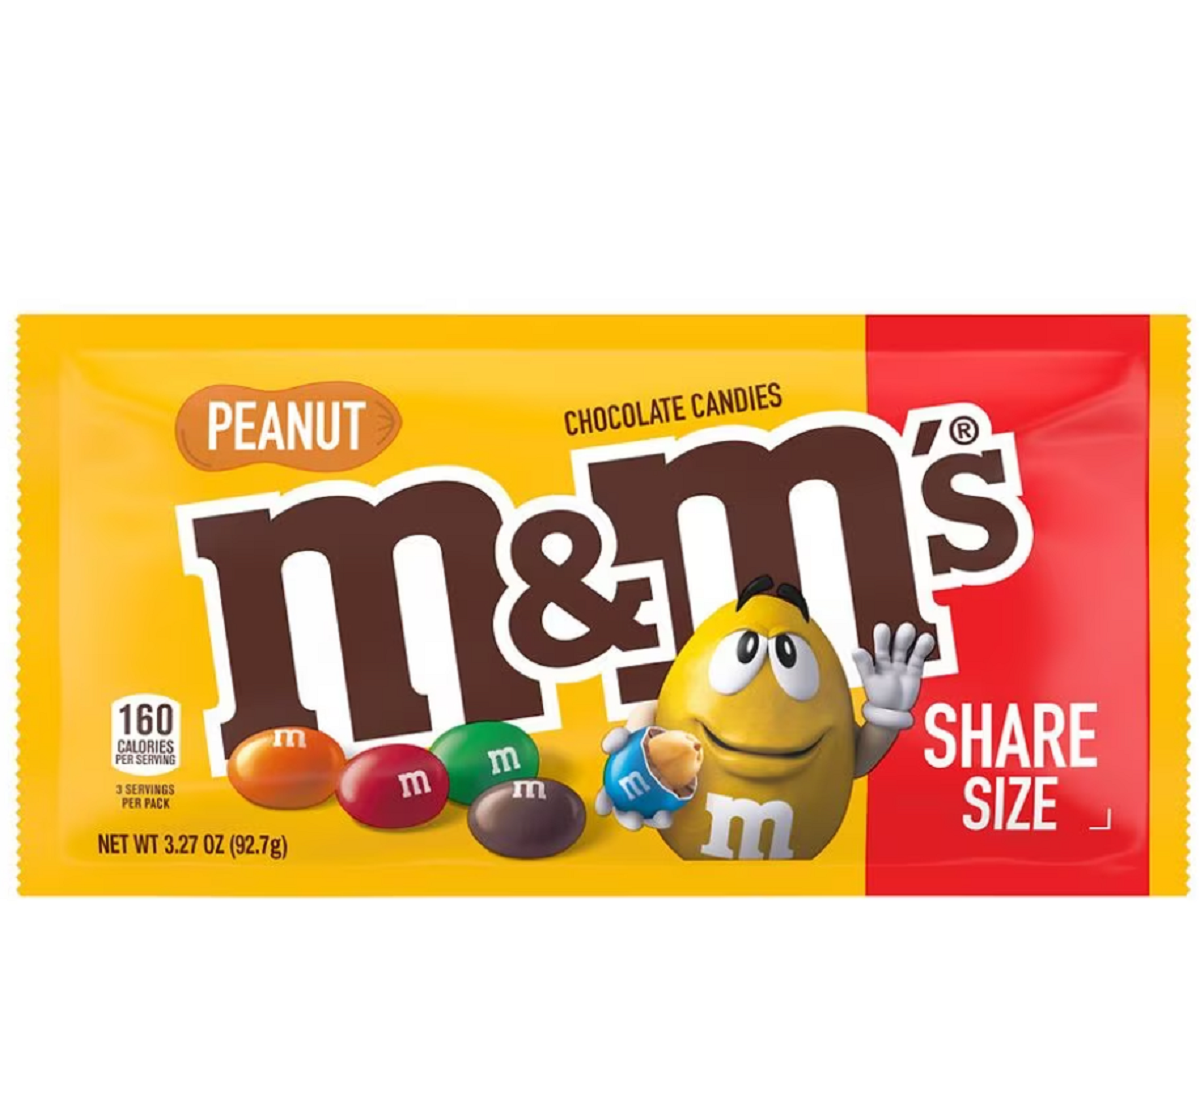 $1 Off with myWalgreens When You Buy 2 Mars King or Share Size Candy